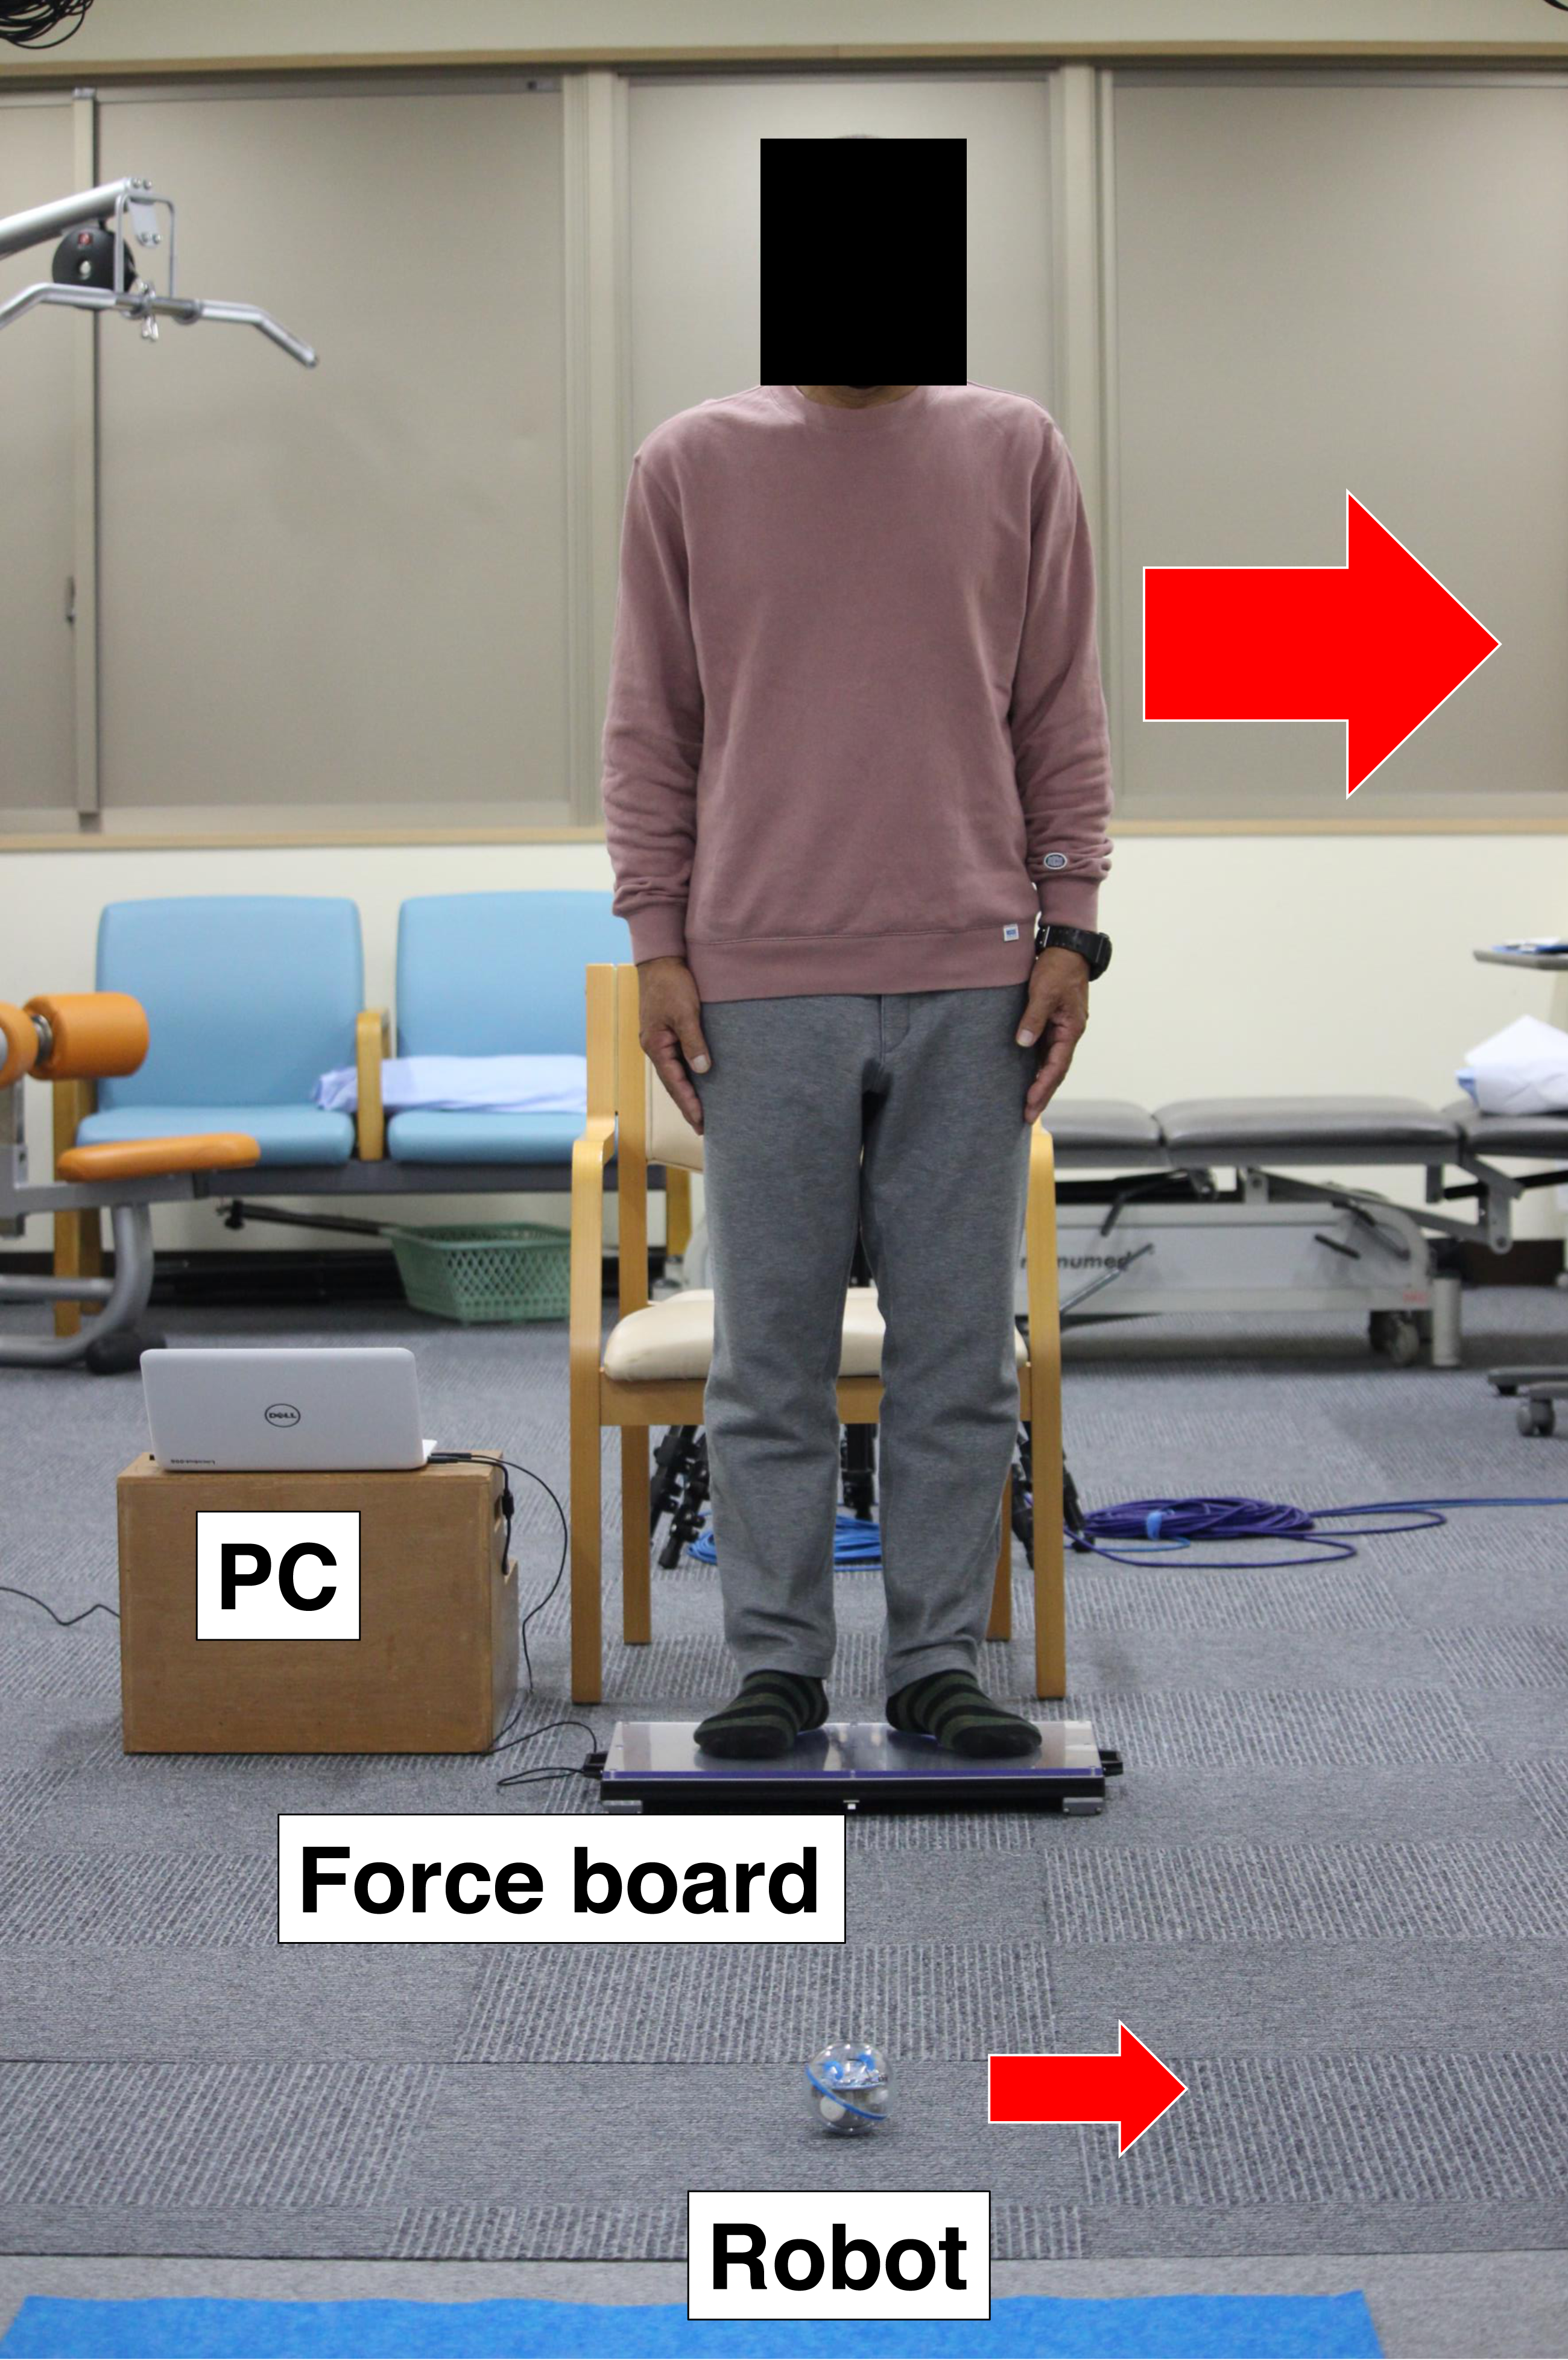 Weight-shifting-based robot control system improves the weight-bearing rate and balance ability of the static standing position in hip osteoarthritis patients a randomized controlled trial focusing on outcomes after total hip arthroplasty PeerJ picture